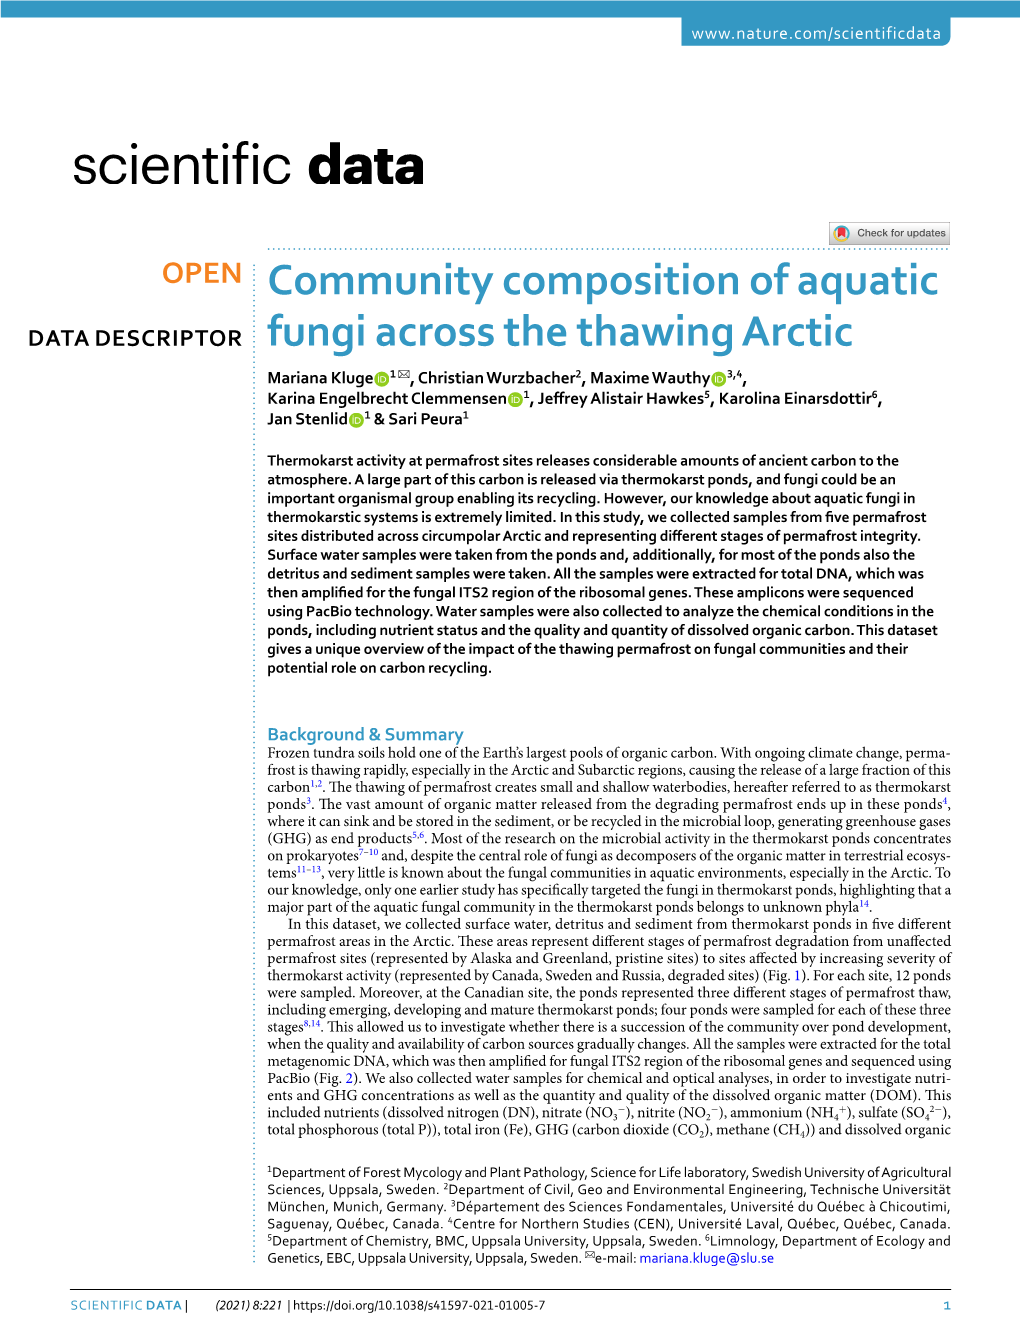 Community Composition of Aquatic Fungi Across the Thawing Arctic